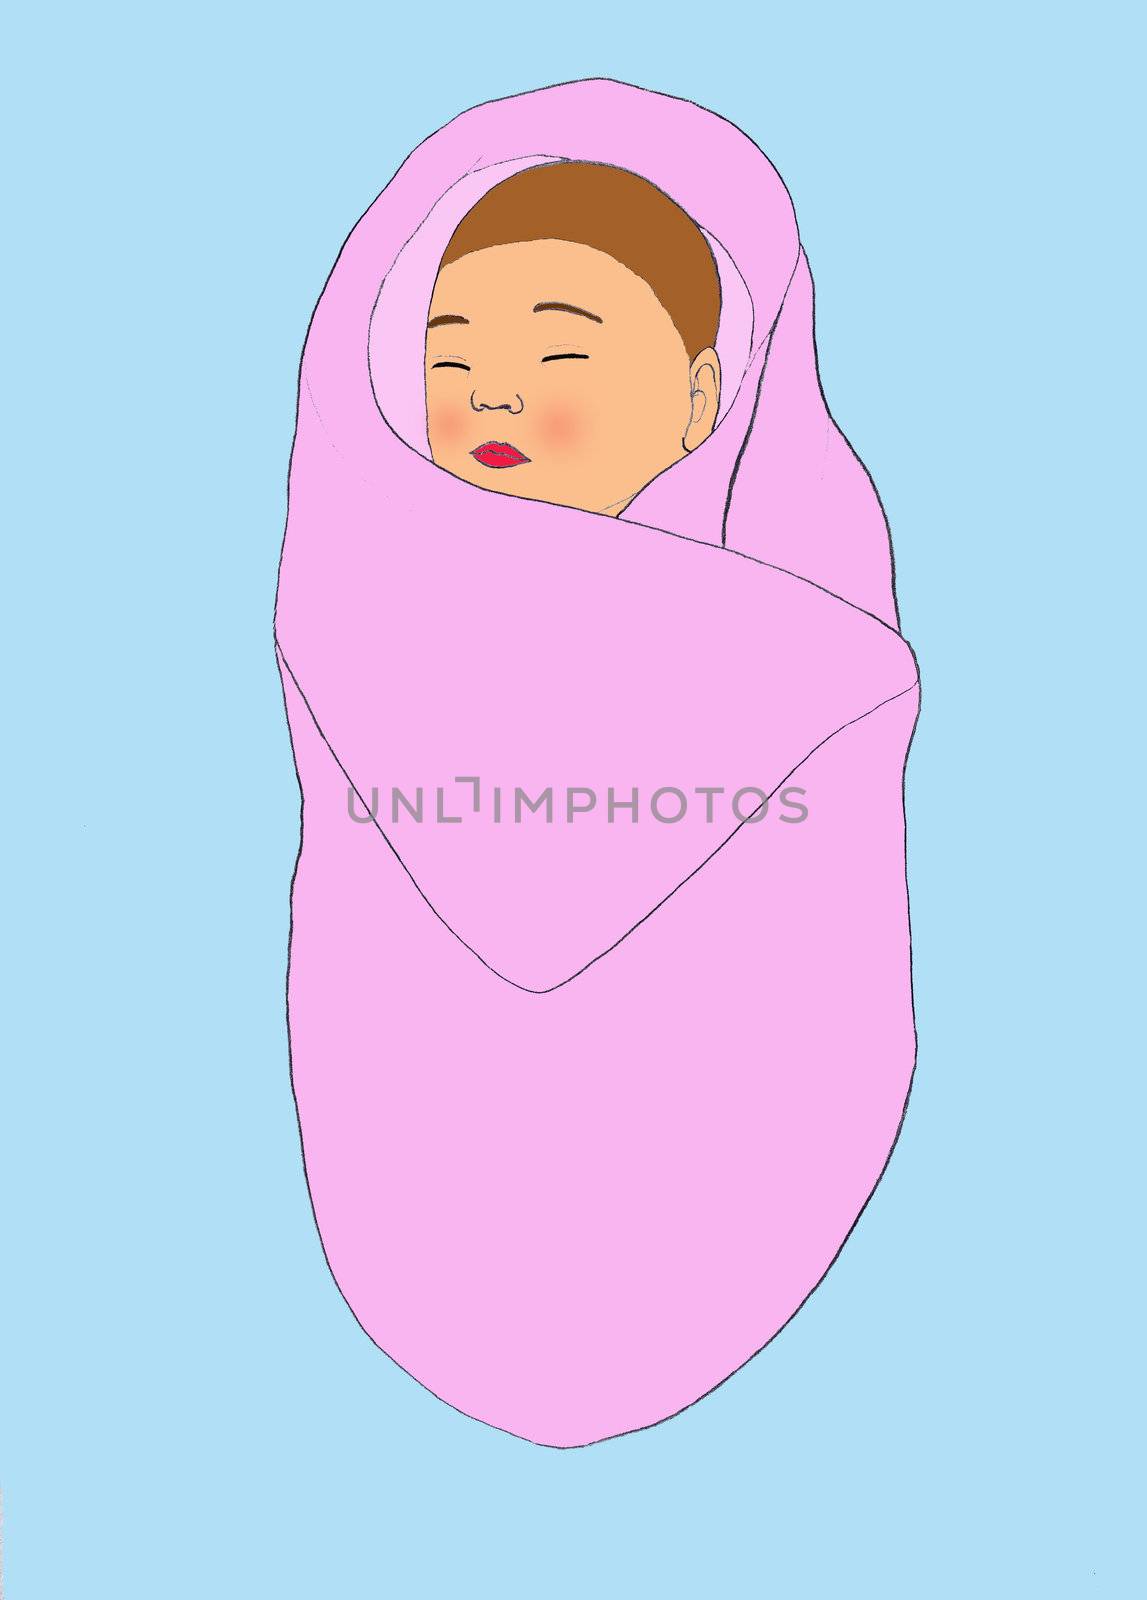 wrapped baby drawing by viviolsen